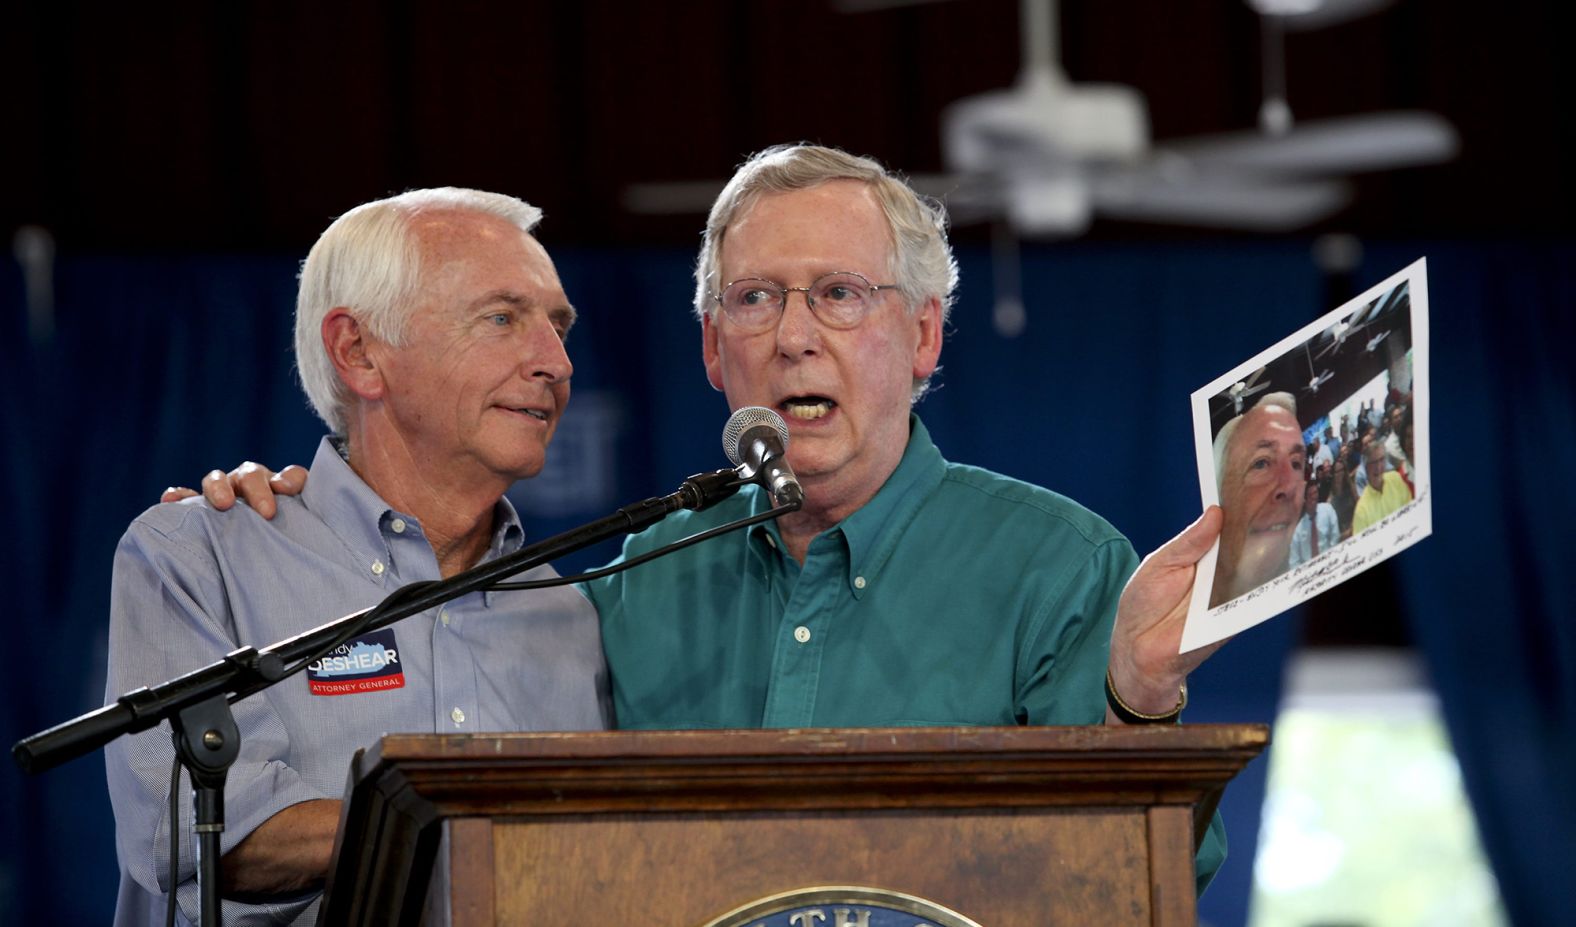 In August 2015, McConnell holds up a selfie photo that he took with Kentucky Gov. Steve Beshear, left, the year before. McConnell reminded Beshear that he falsely predicted that McConnell would lose his Senate race and retire. McConnell signed the photo for Beshear, who was term-limited and would be leaving office before him.